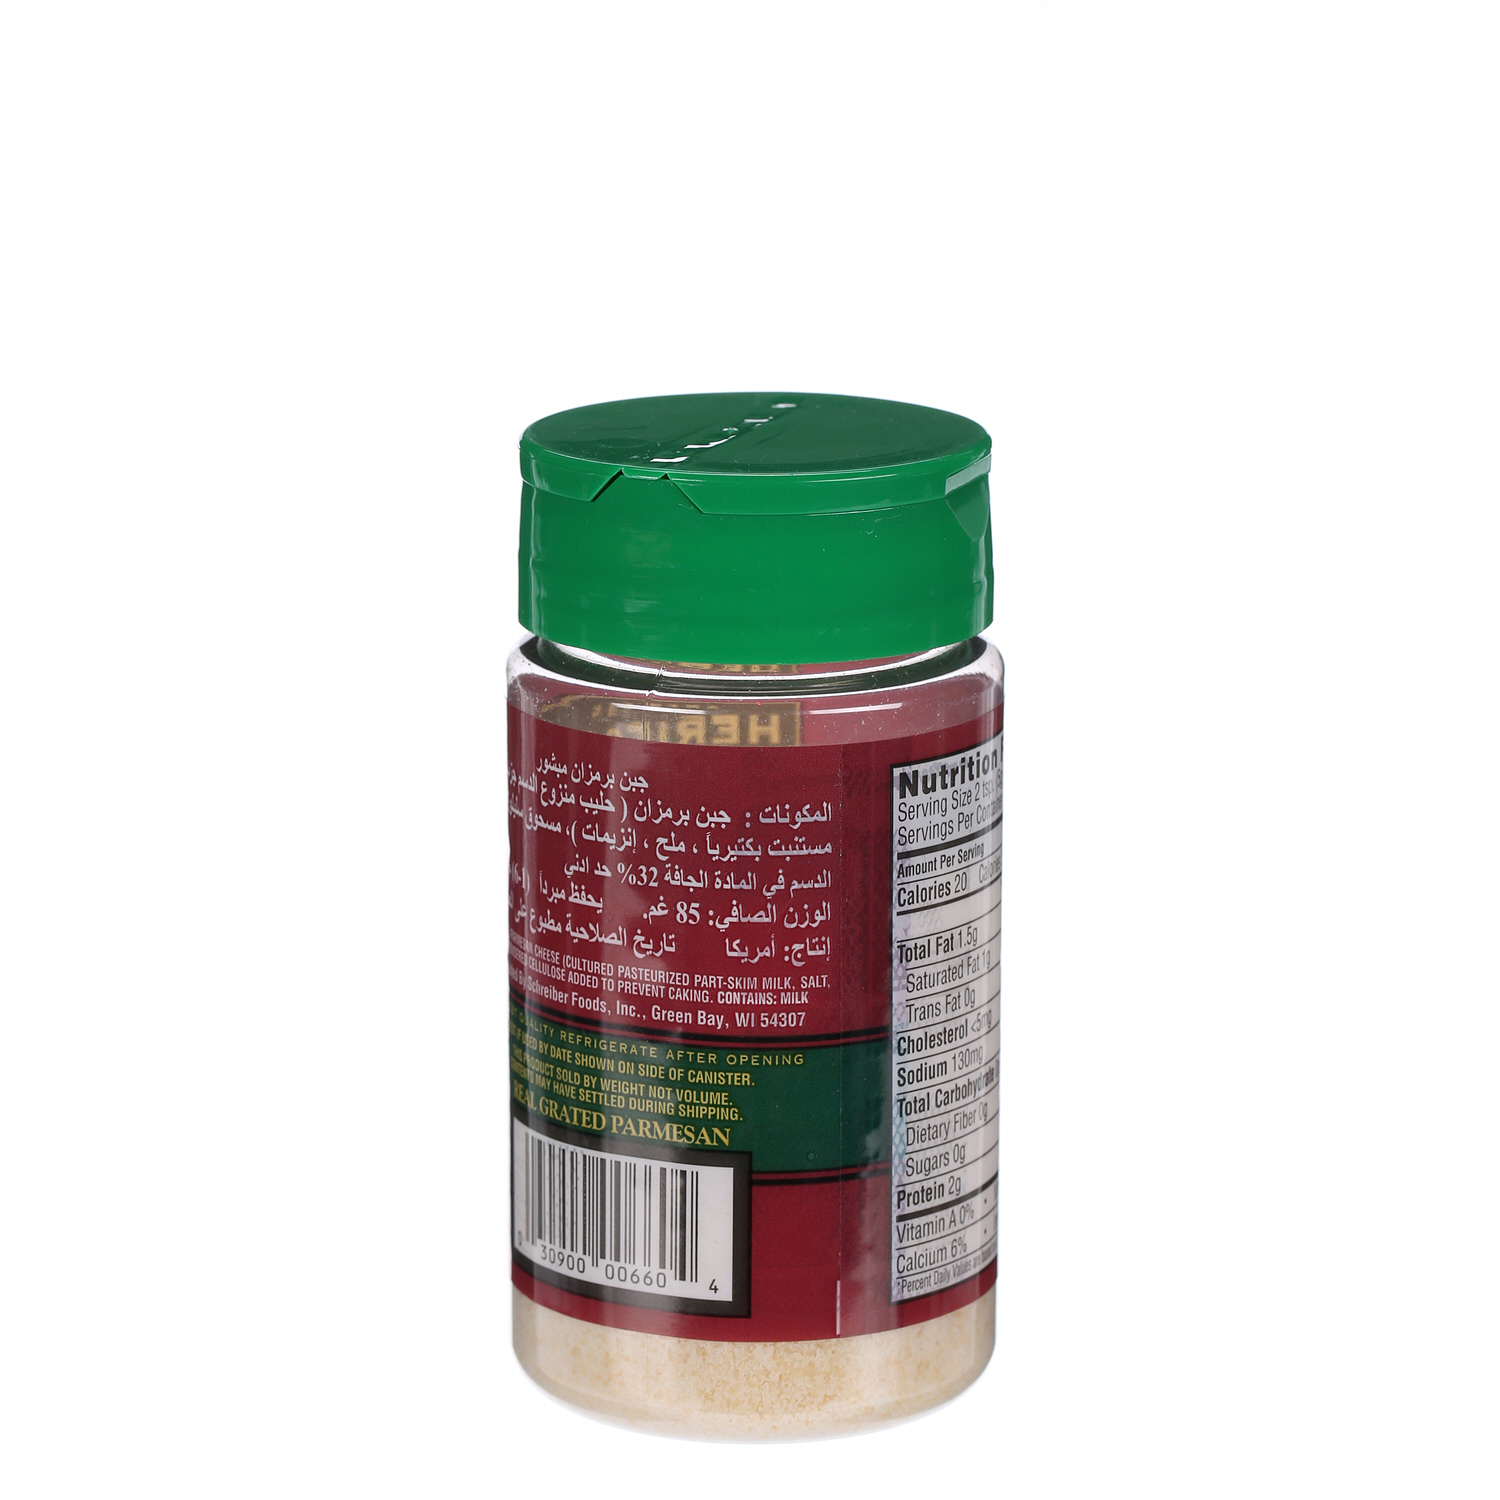 American Heritage Grated Parmesan Cheese 3 Oz